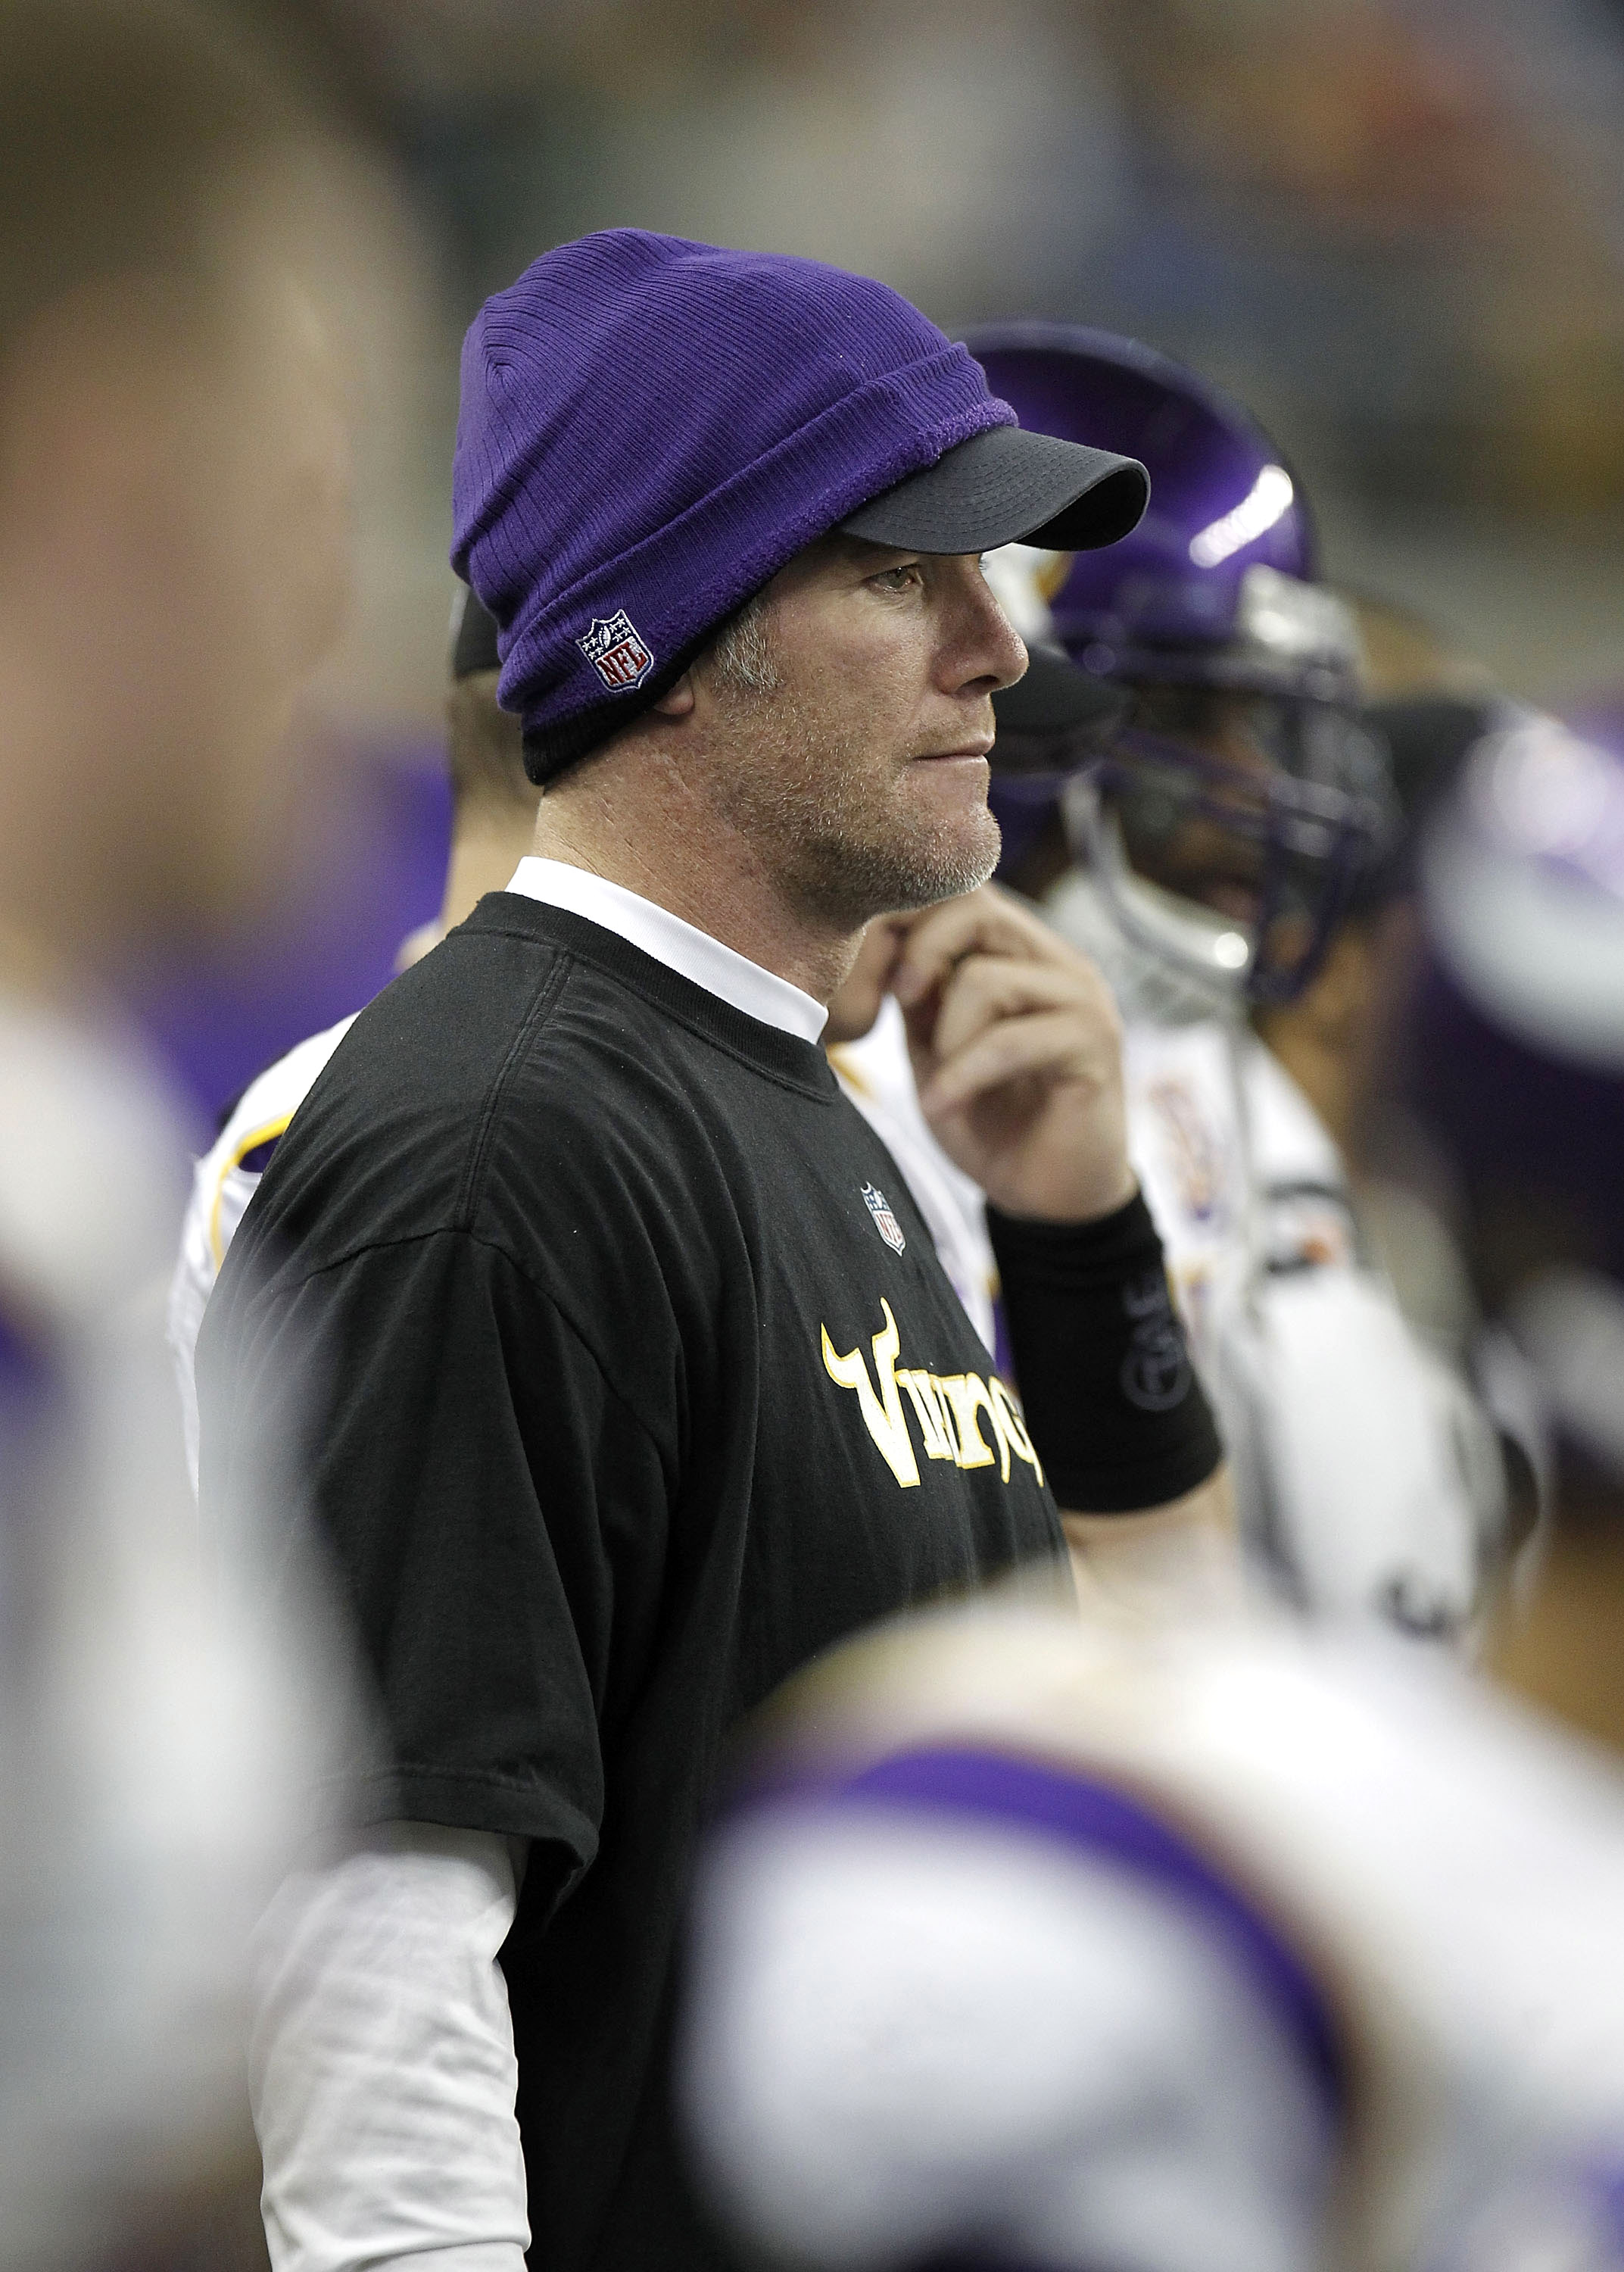 DETROIT, MI - JANUARY 02:  Brett Favre #4 of the Minnesota Vikings looks on from the bench while playing the Detroit Lions at Ford Field on January 2, 2011 in Detroit, Michigan.  (Photo by Gregory Shamus/Getty Images)